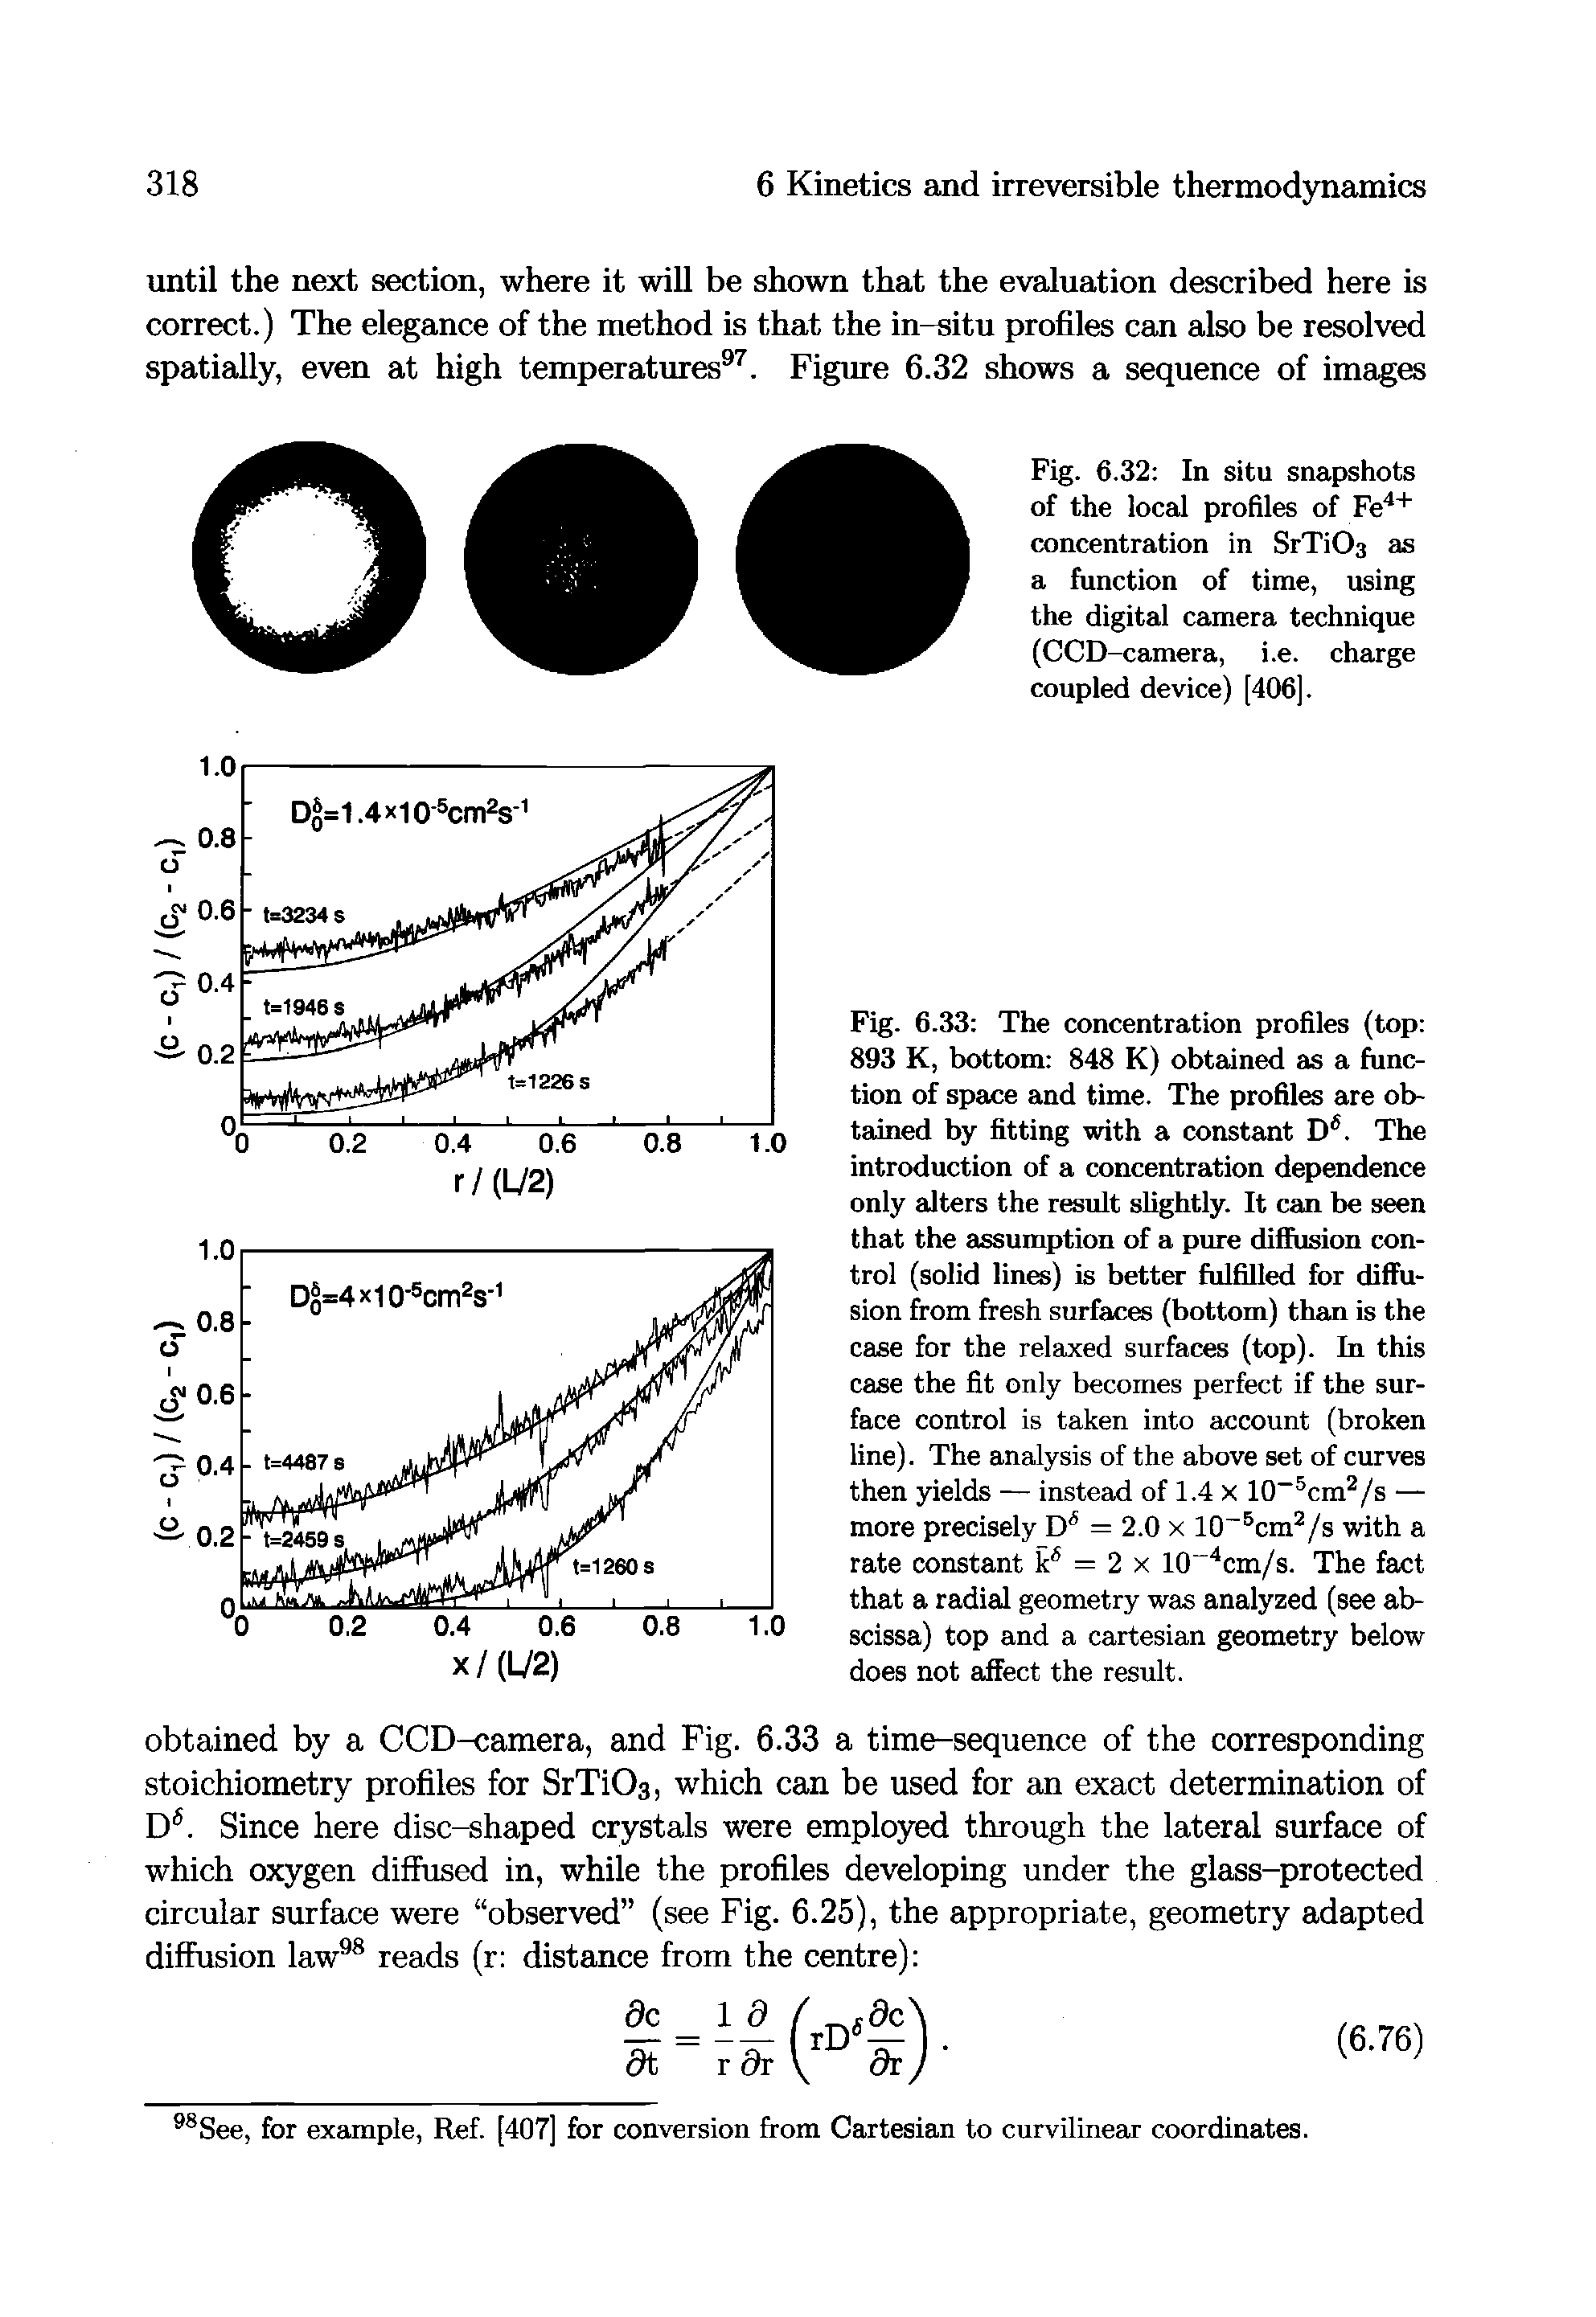 Fig. 6.33 The concentration profiles (top 893 K, bottom 848 K) obtmned as a Unction of space and time. The profiles are obtained by fitting with a constant D. The introduction of a concentration dependence only alters the result slightly. It can be seen that the assumption of a pure difiPusion control (solid lines) is better fulfilled for diffusion from fresh surfaces (bottom) than is the case for the relaxed surfaces (top). In this case the fit only becomes perfect if the surface control is taken into account (broken line). The analysis of the above set of curves then yields — instead of 1.4 x 10 cm /s — more precisely O = 2.0 x 10 cm /s with a rate constant P = 2 x 10 cm/s. The fact that a radial geometry was analyzed (see abscissa) top and a cartesian geometry below does not affect the result.